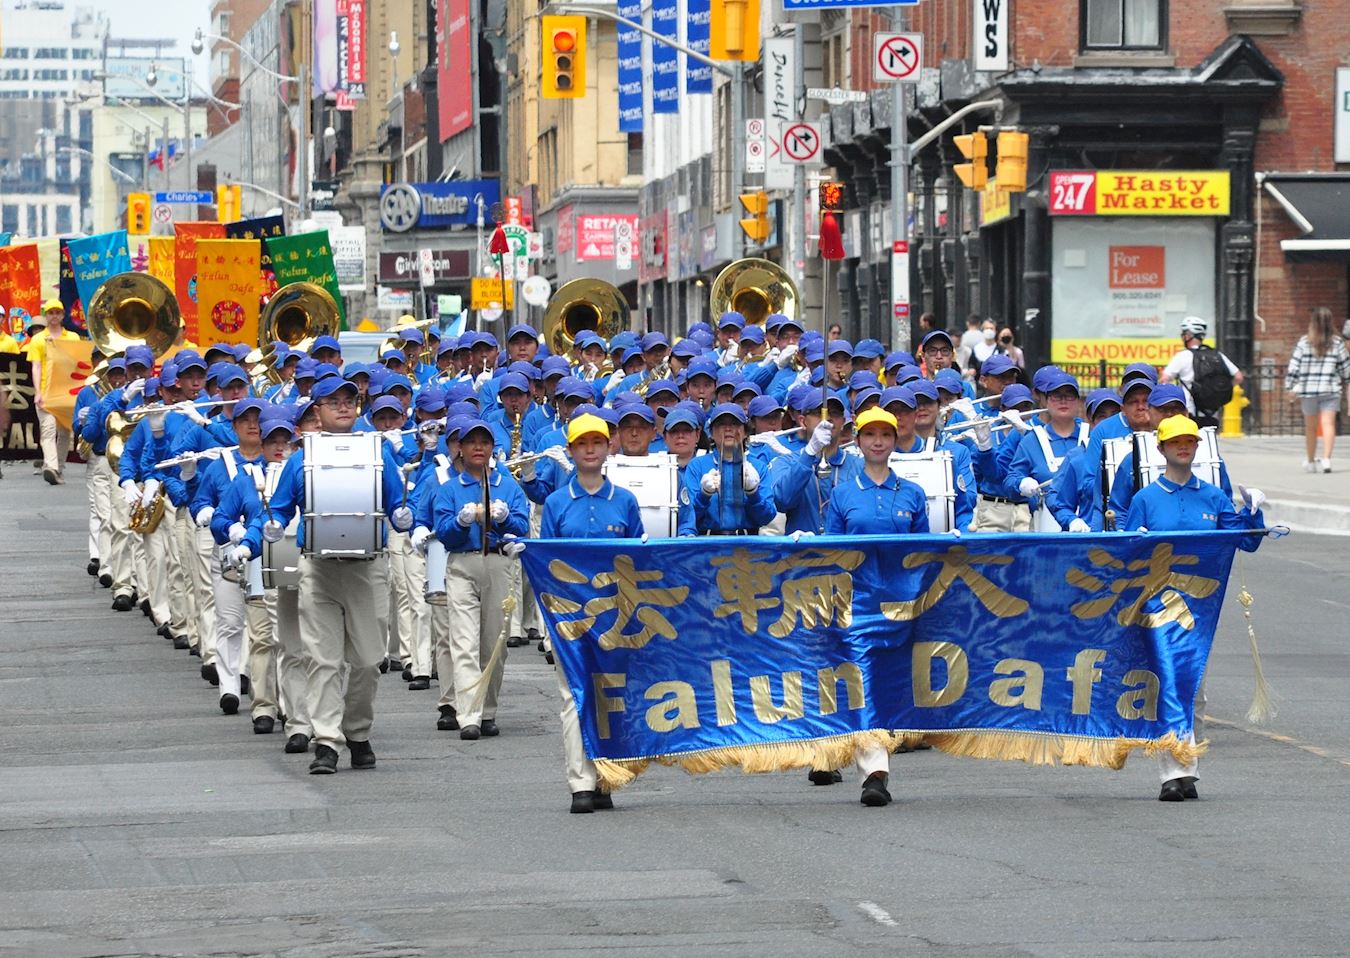 Image for article Toronto: Public Praises Falun Dafa During Parade Held to Expose Persecution in China